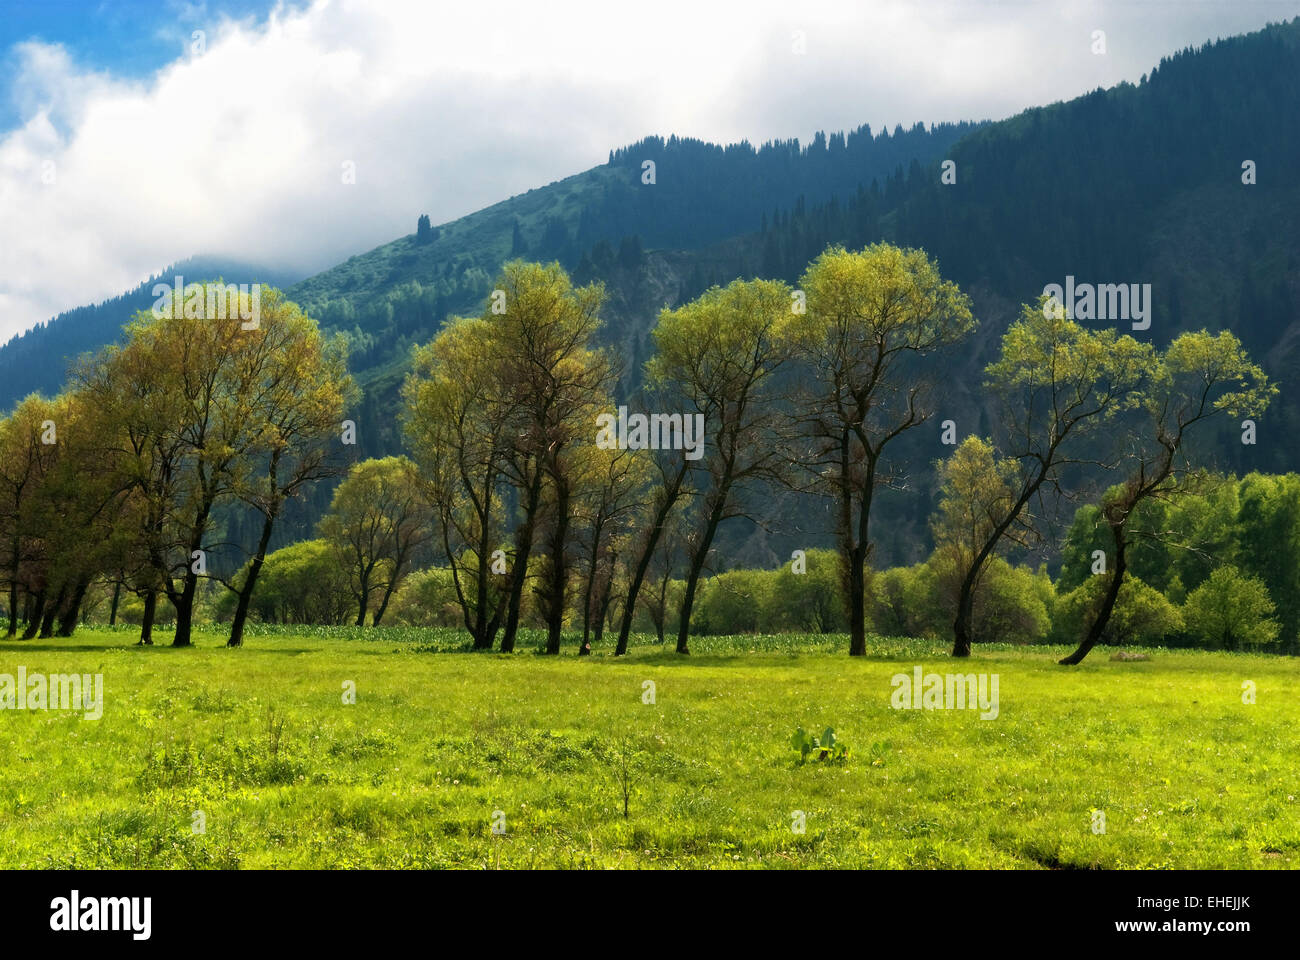 Group of trees in mountains Stock Photo